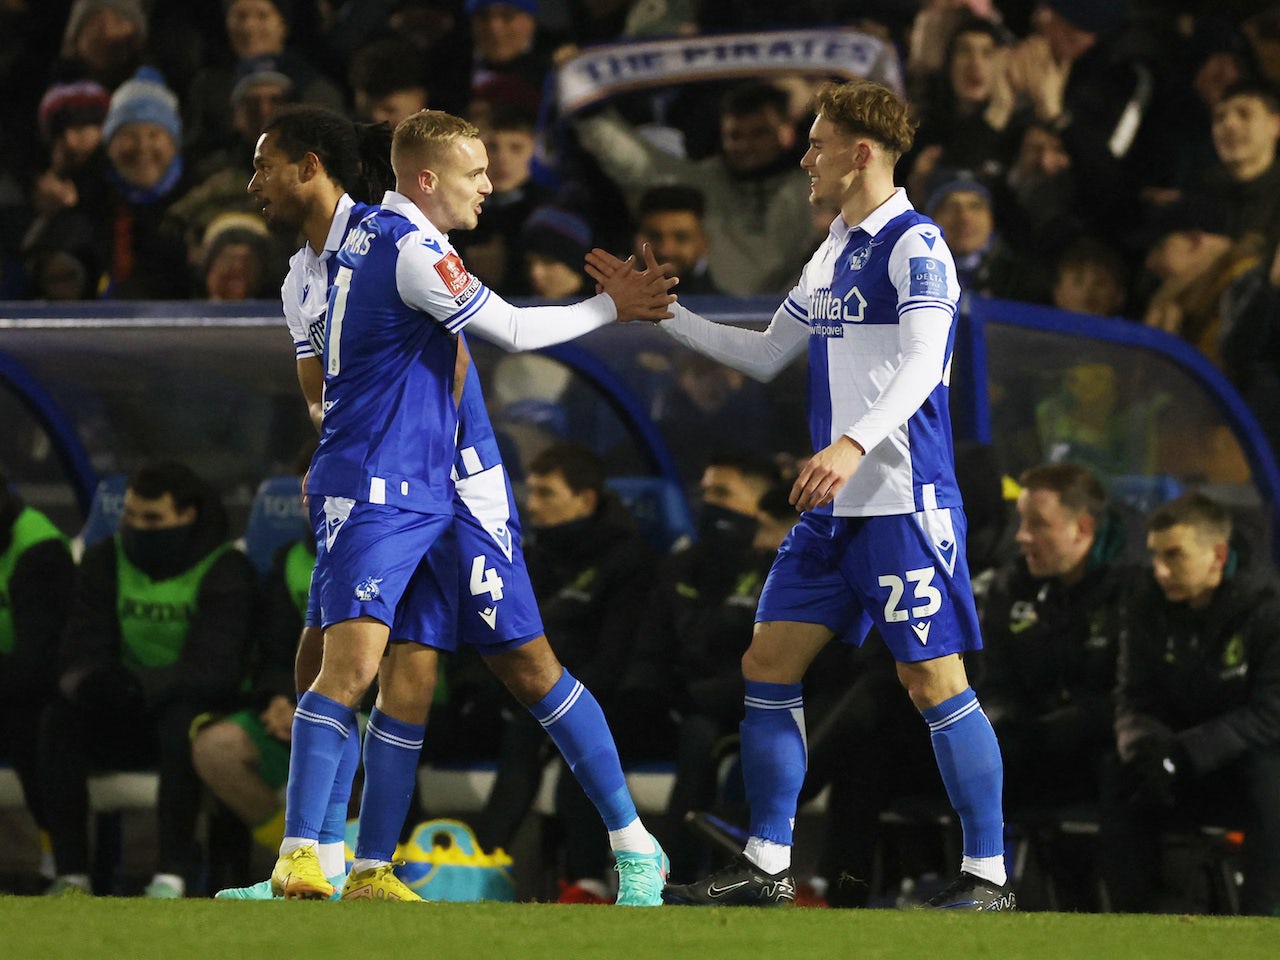 Preview: Bristol Rovers vs. Derby County - prediction, team news, lineups